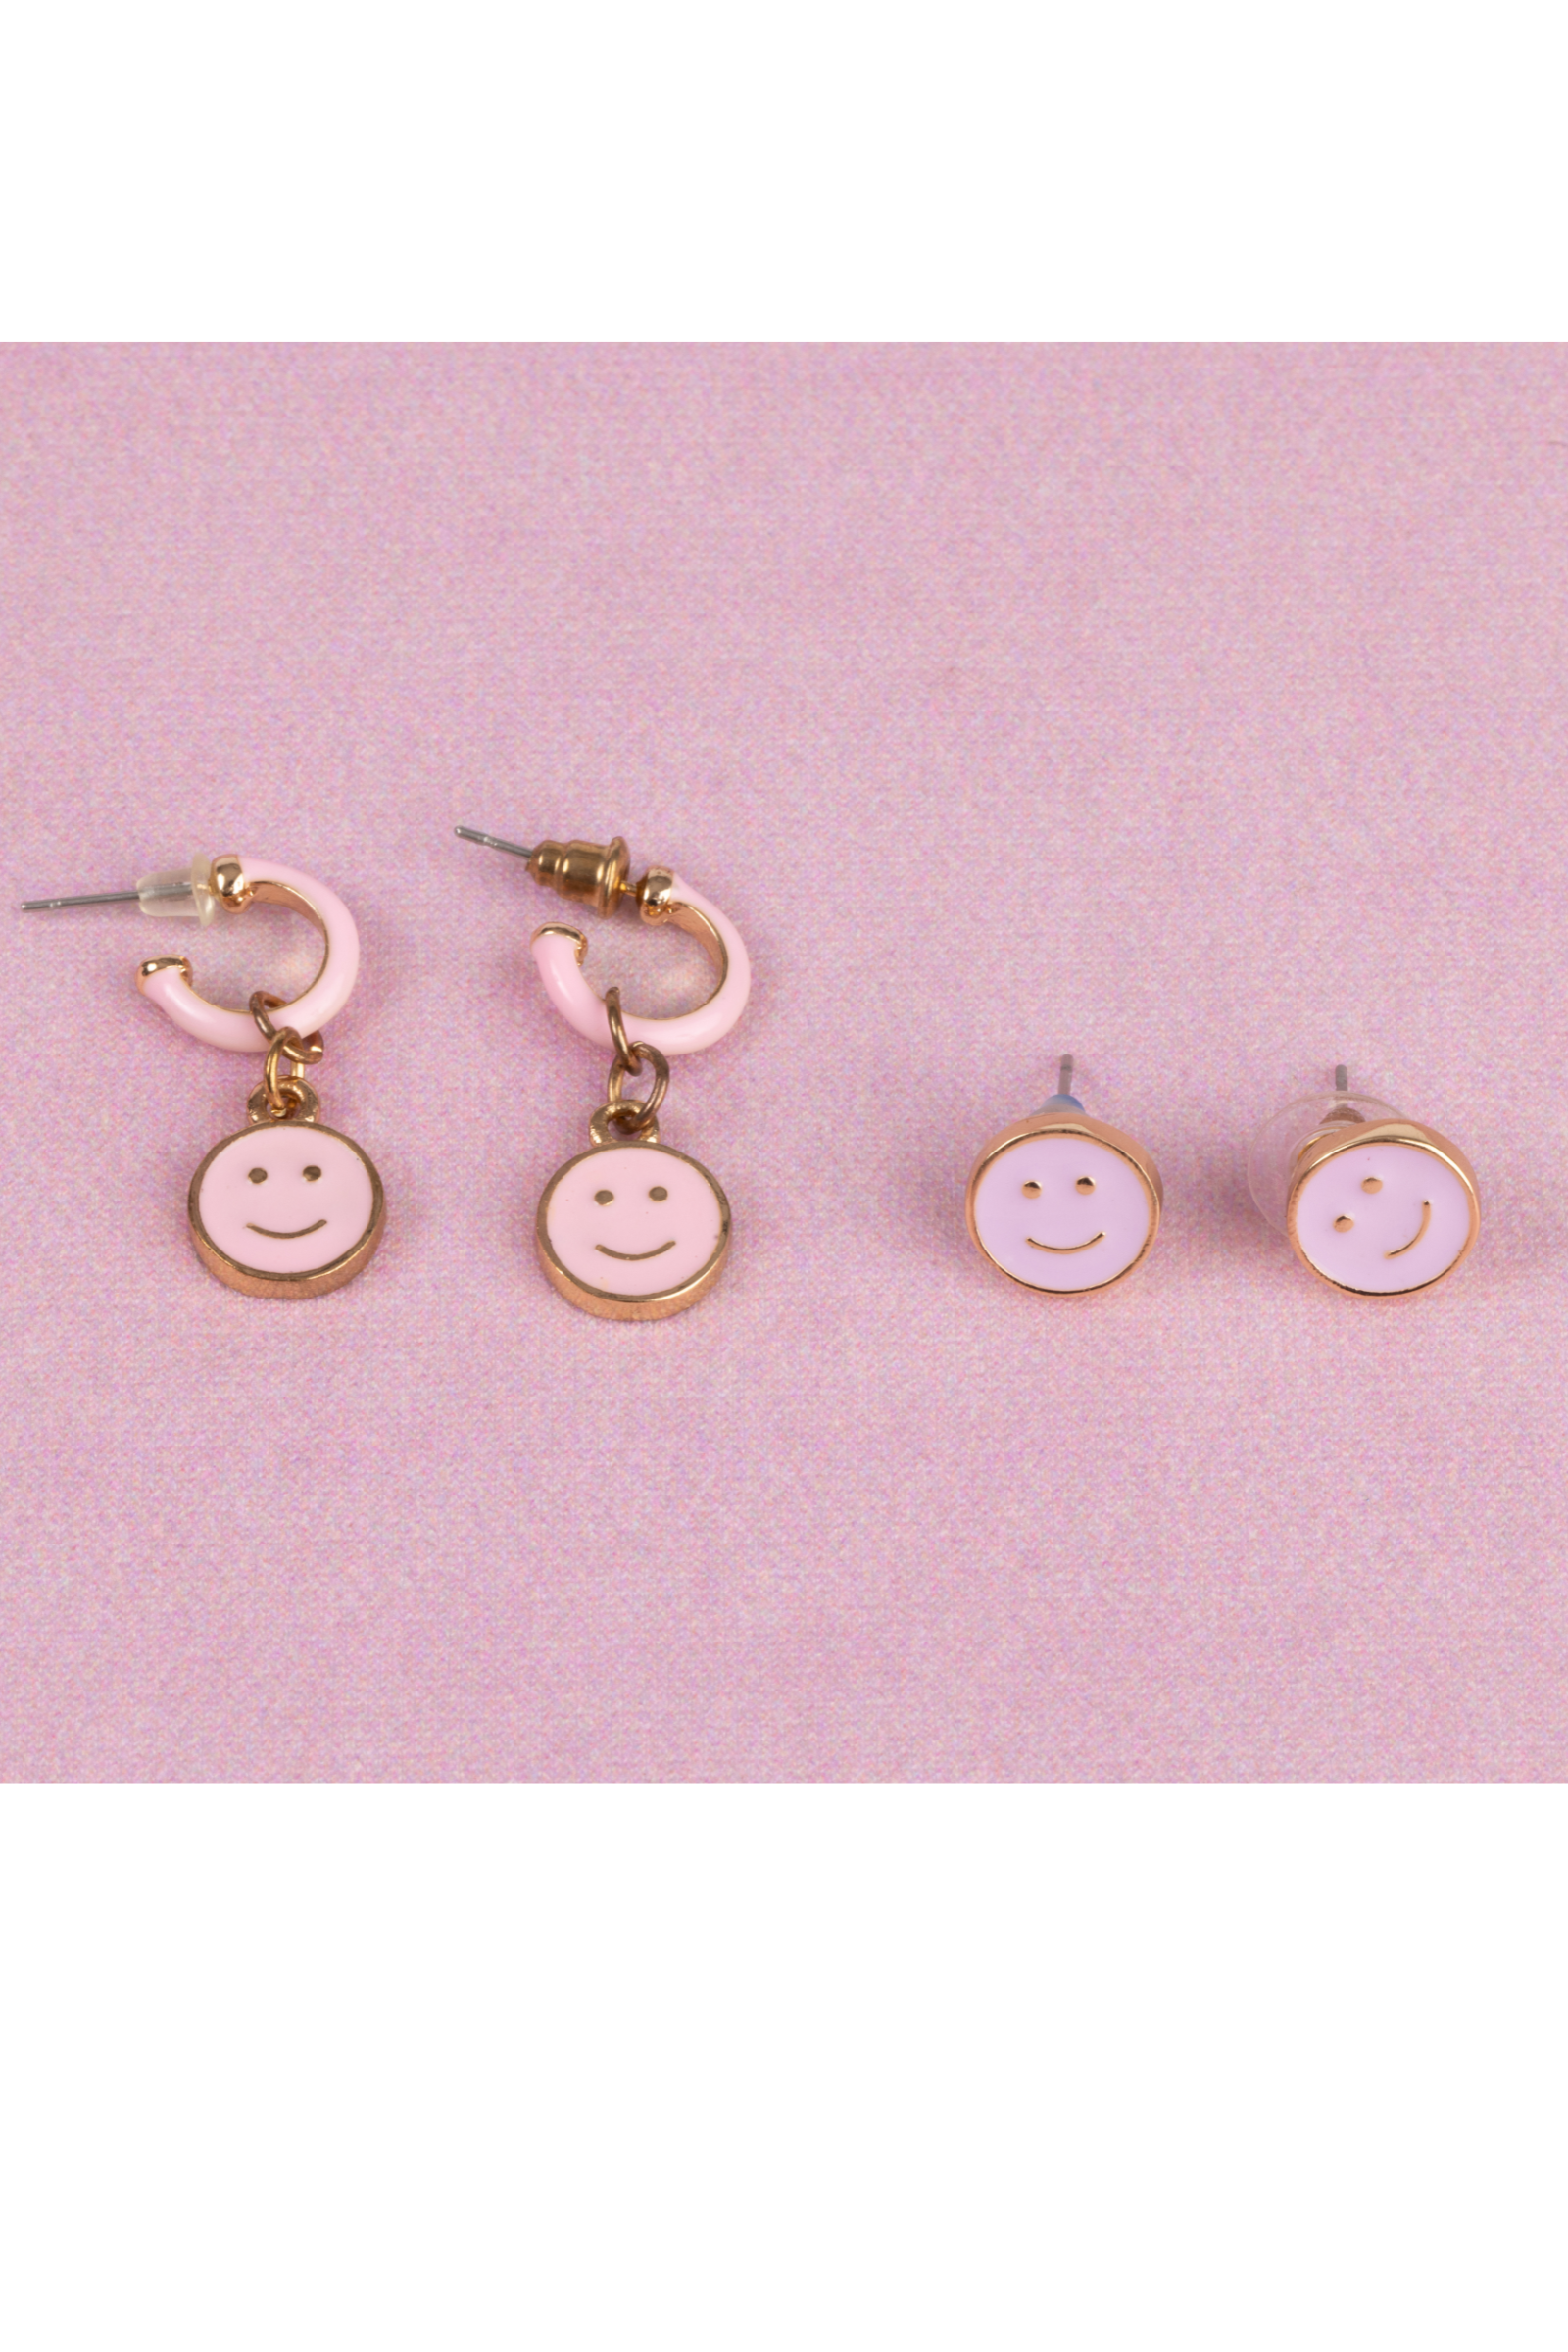 Boutique Chic All Smiles Earrings